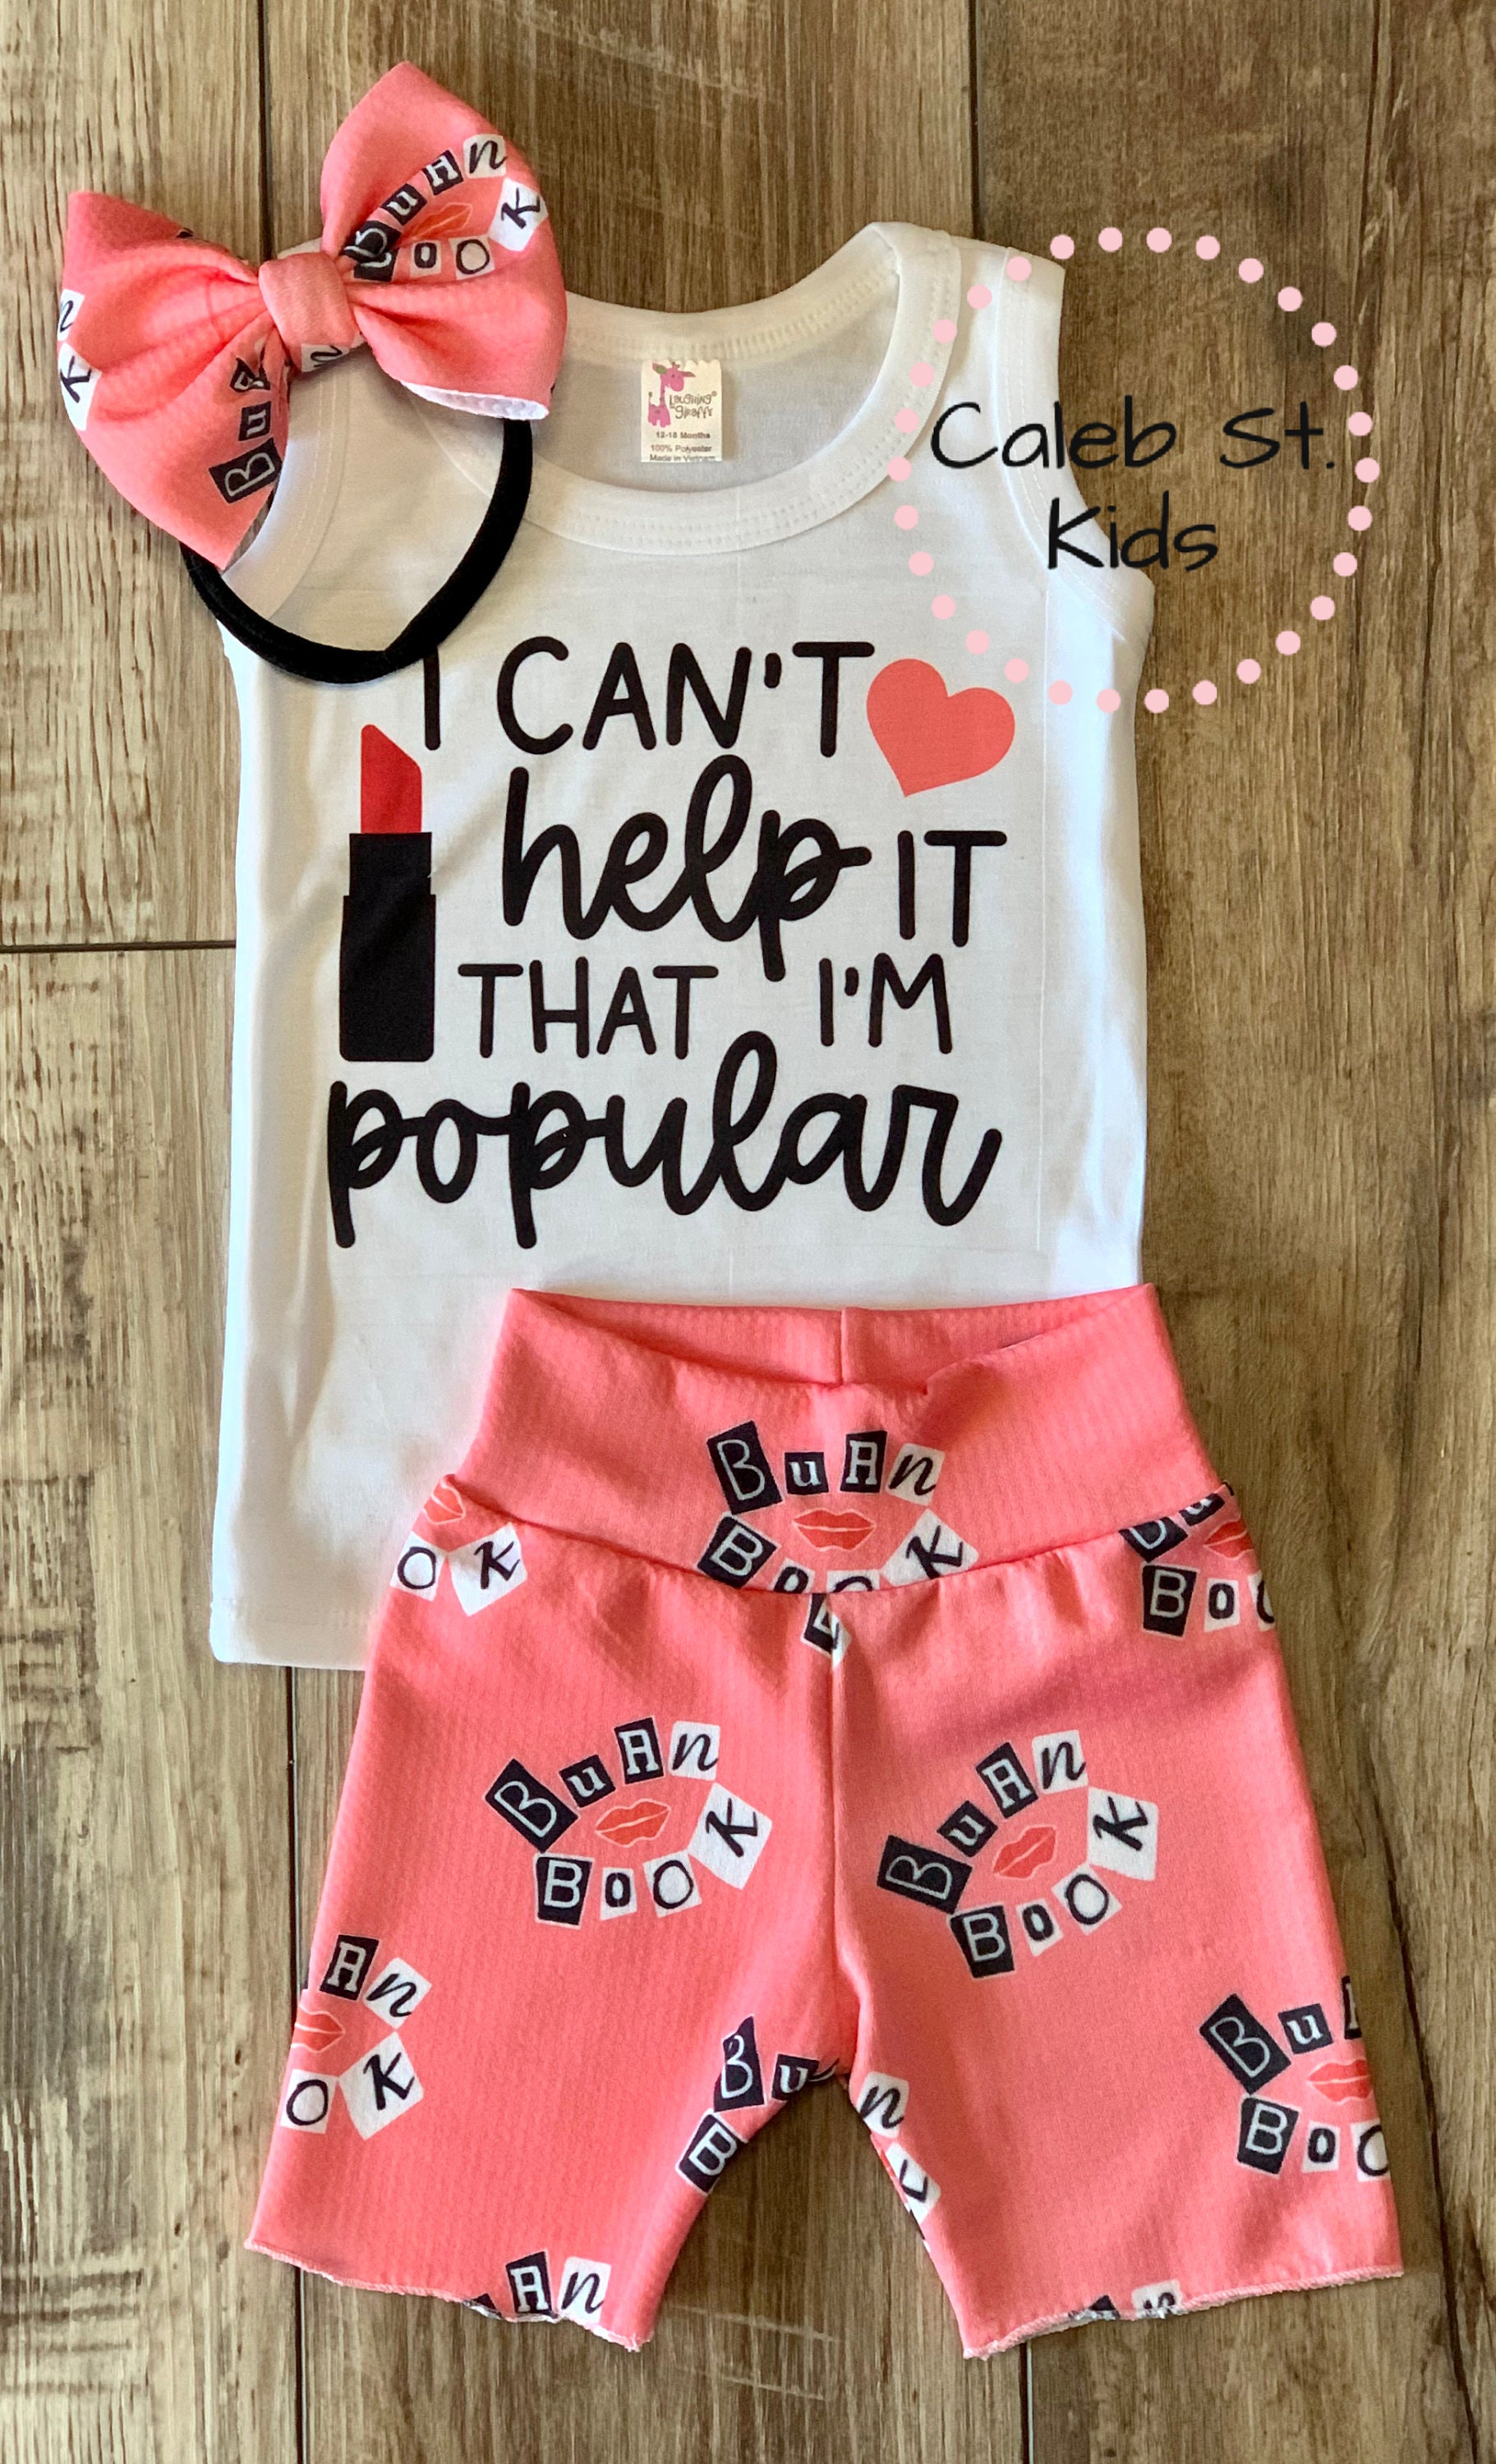 Mean Girls Kids & Babies' Clothes for Sale